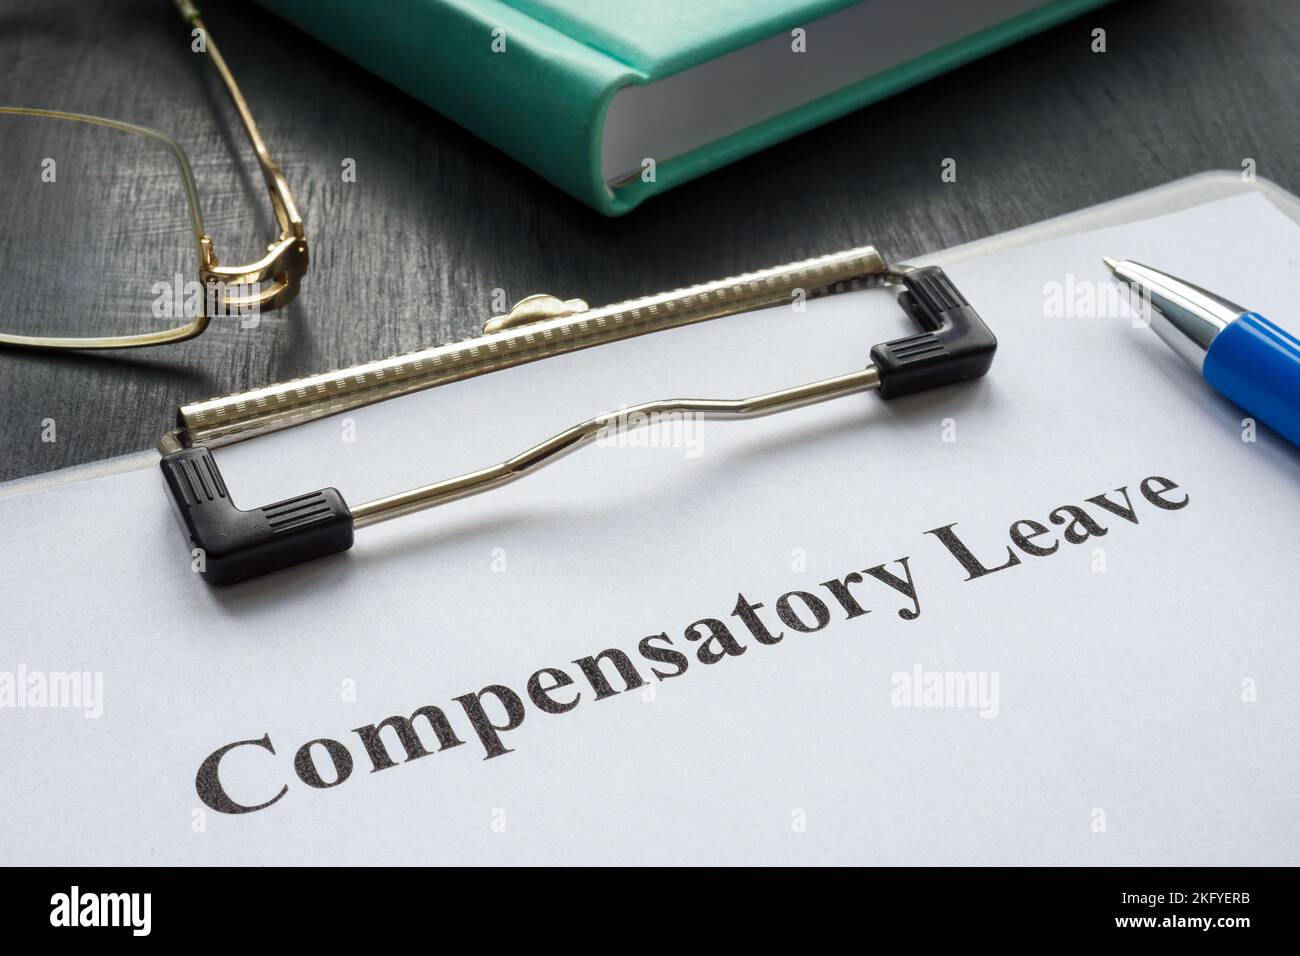 Document about Compensatory leave and pen for signing. Stock Photo